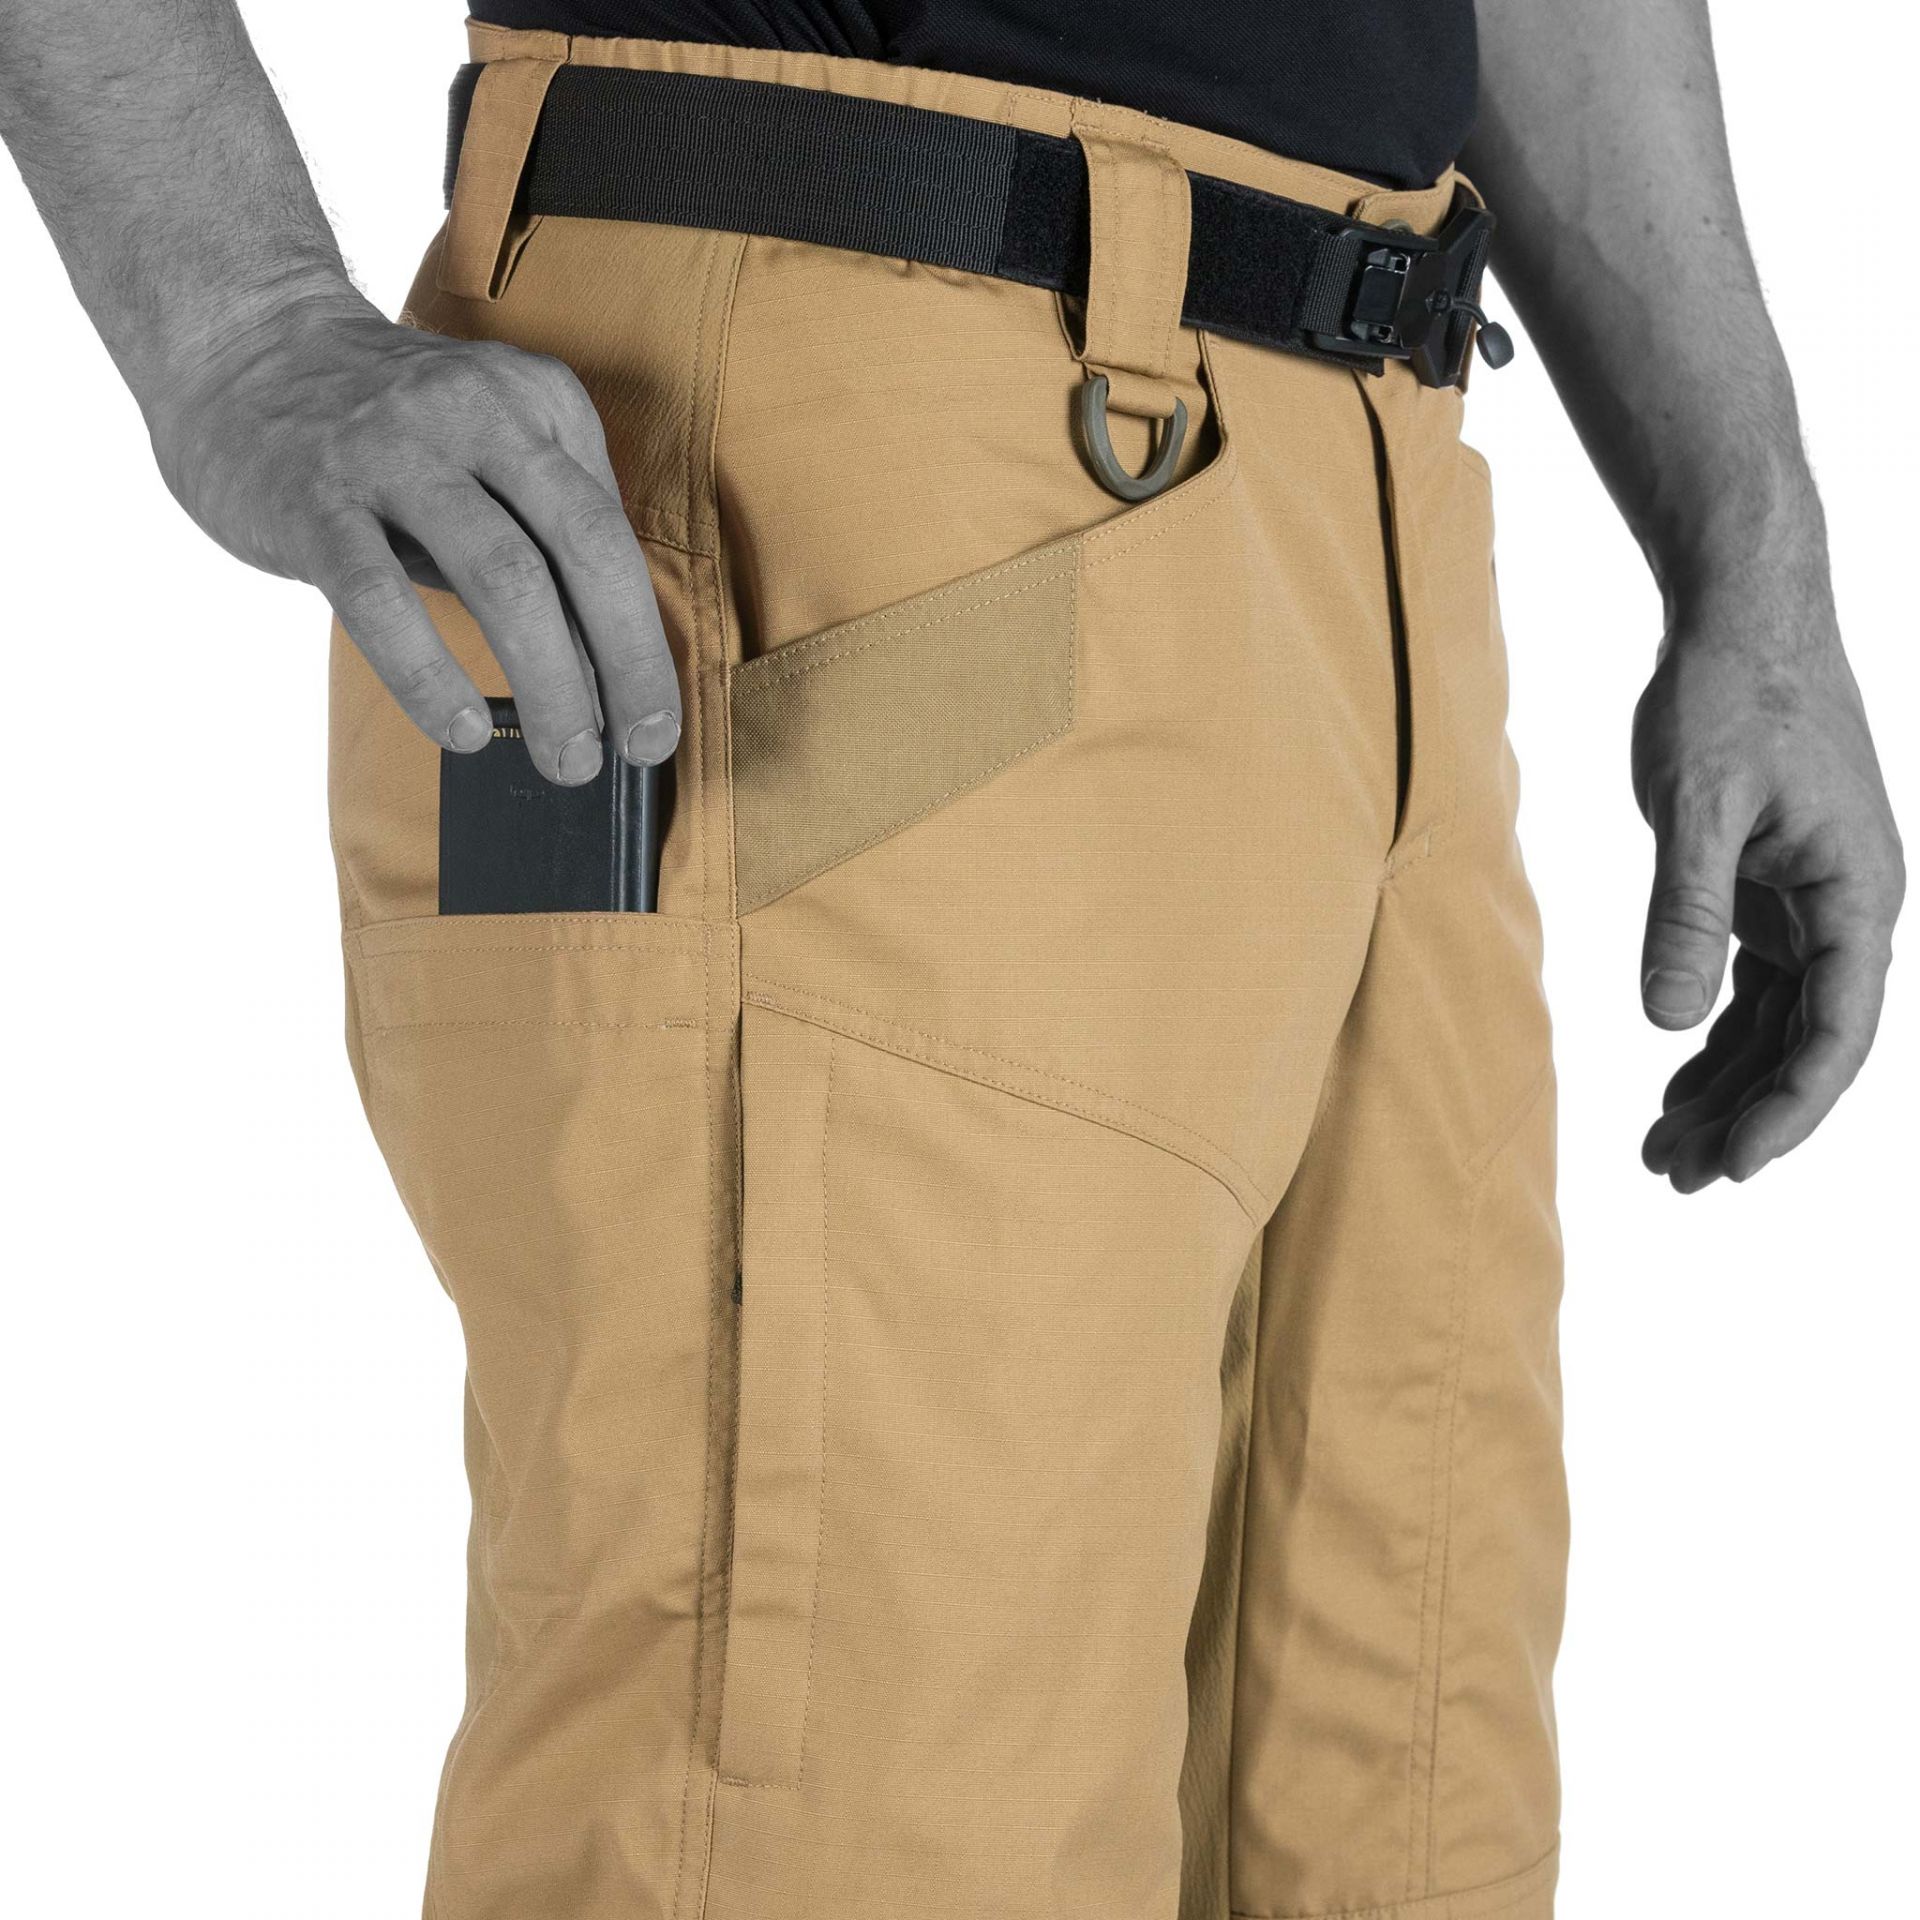 https://ufpro.com/storage/app/media/Product%20Images/Pants/P-40%20Urban/Product%20images/Coyote%20Brown/thumb/1920x1920.crop/p40-urban-pants-coyote-brown-2019-608.jpg